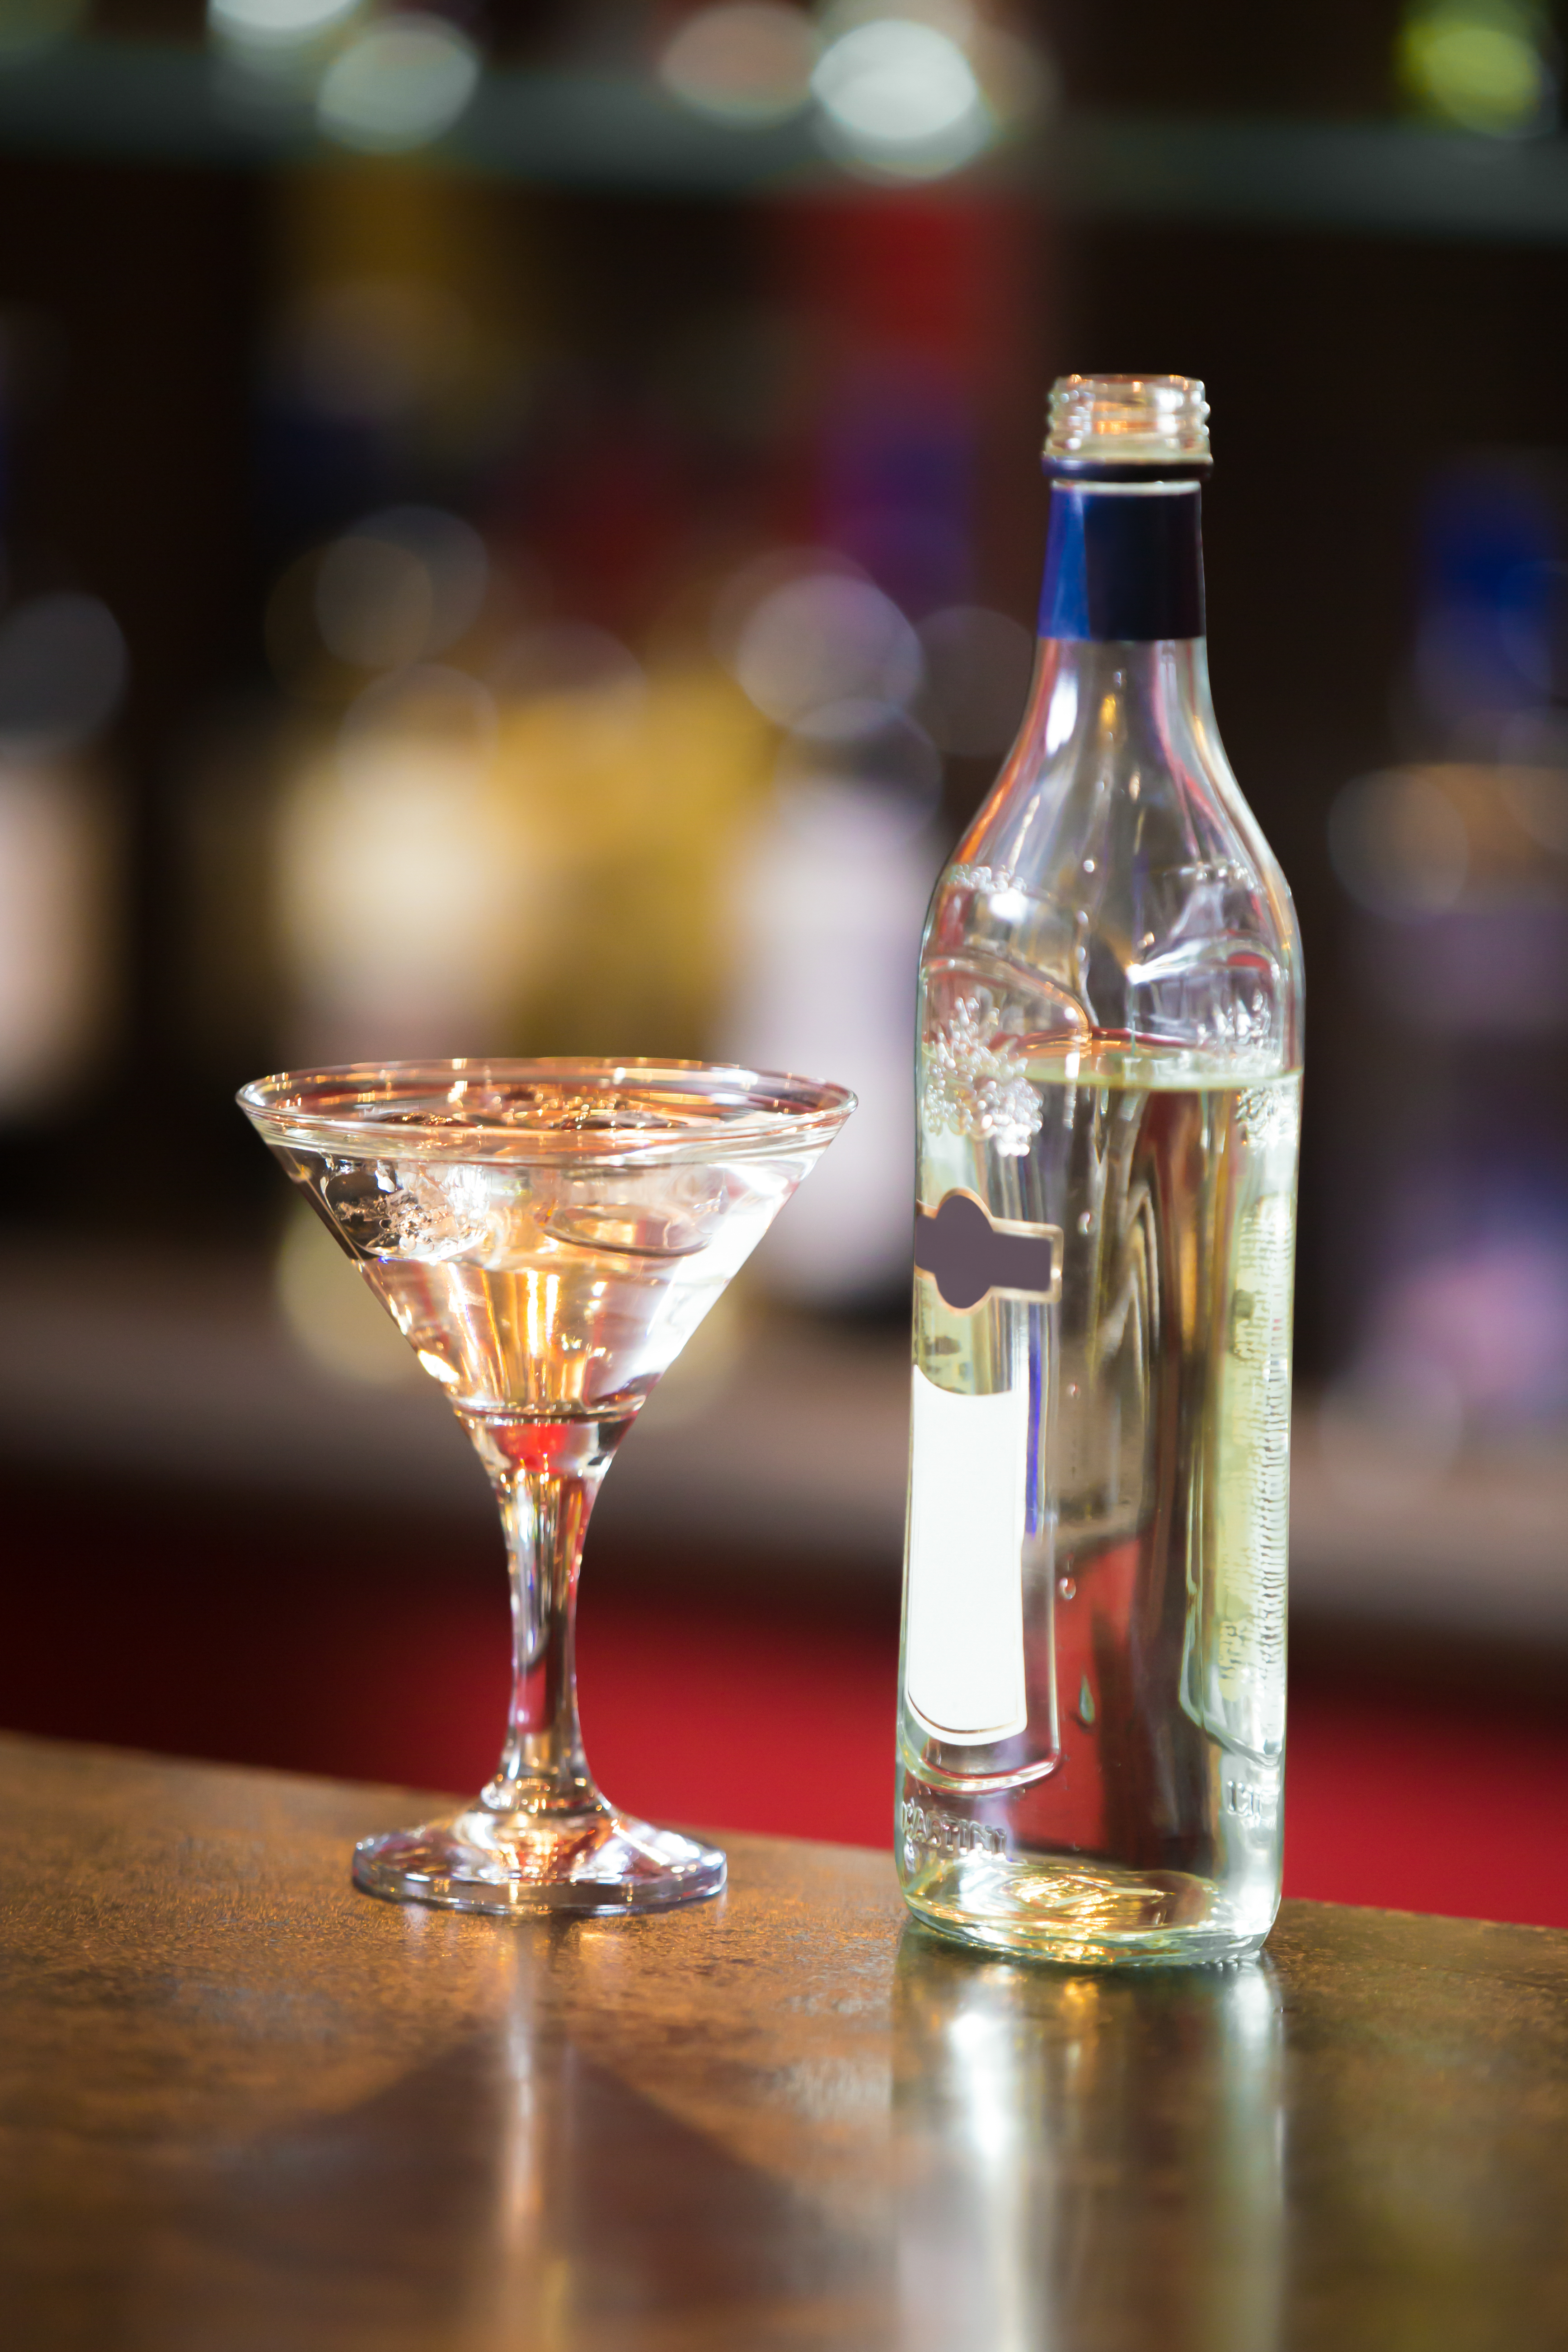 Bottle and Alcoholic drink with ice cubes and olive in martini glass on bar counter